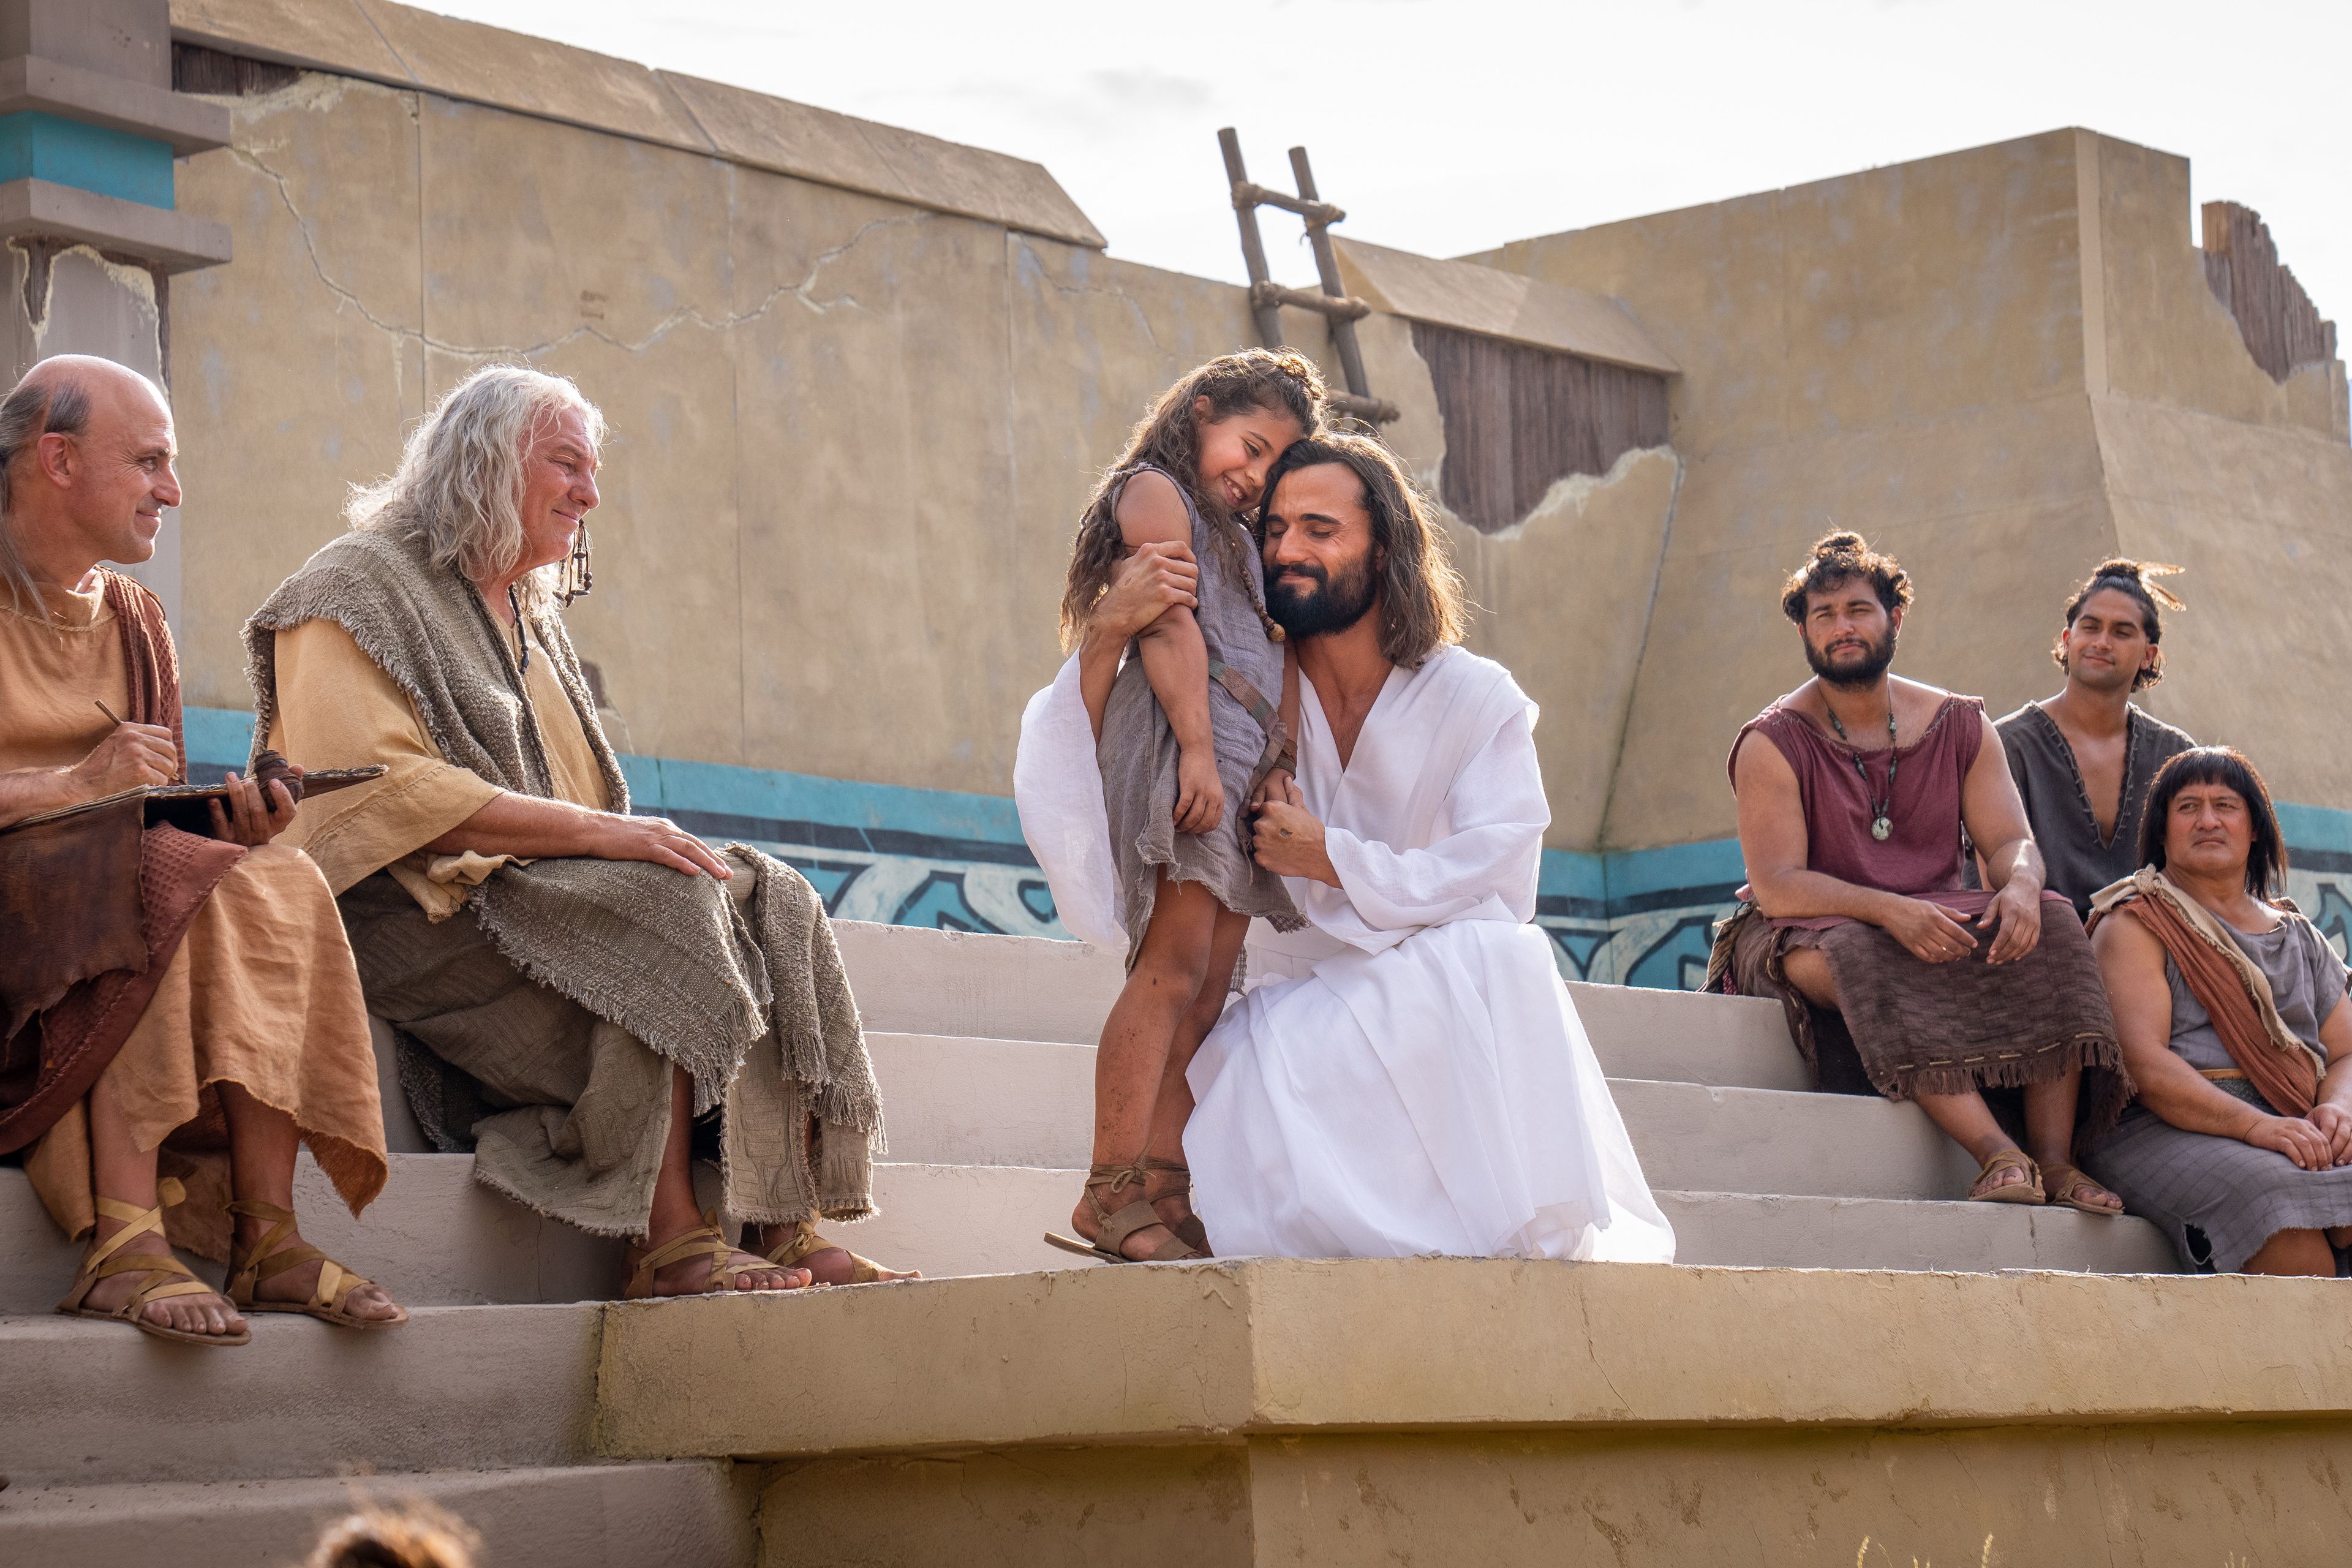 Jesus Christ greets Nephites on the steps of the Bountiful Temple. He embraces a young Nephite girl.